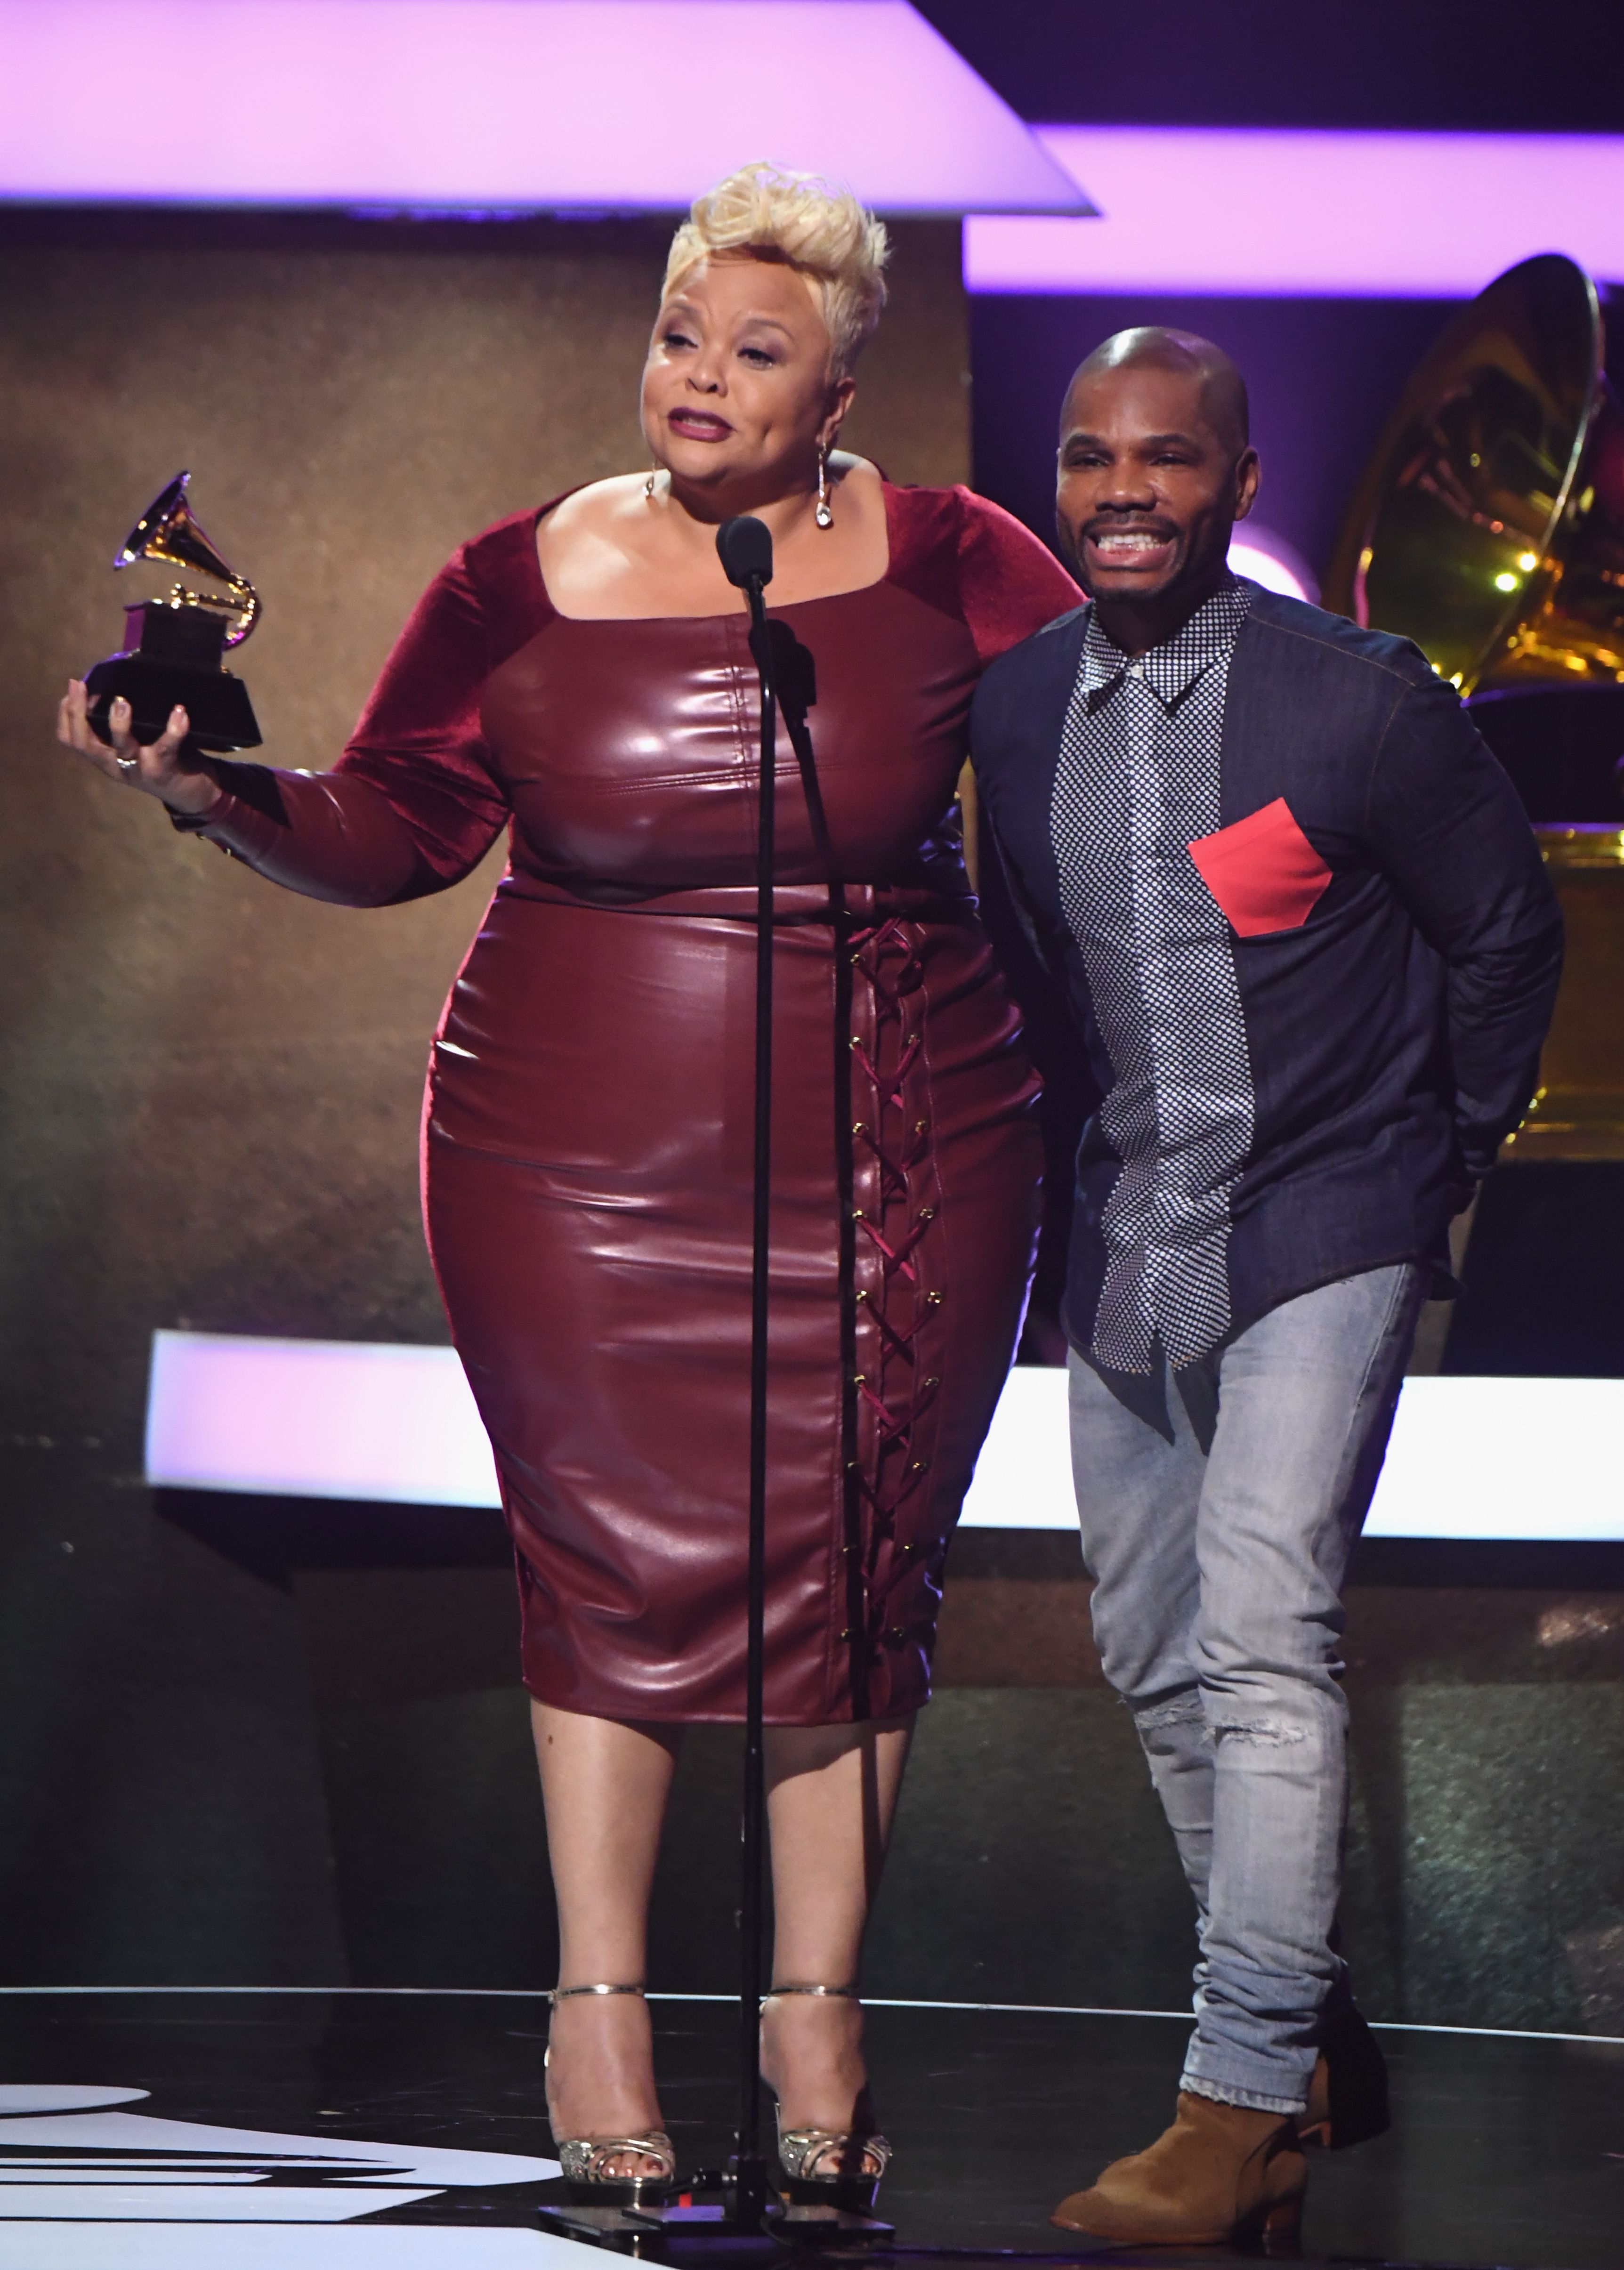 Tamela Mann and Kirk Franklin accepted the award for Best Gospel Performance/Song for 'God Provides' at the 59th Grammy Awards at Staples Center on February 12, 2017 | Photo: Getty Images